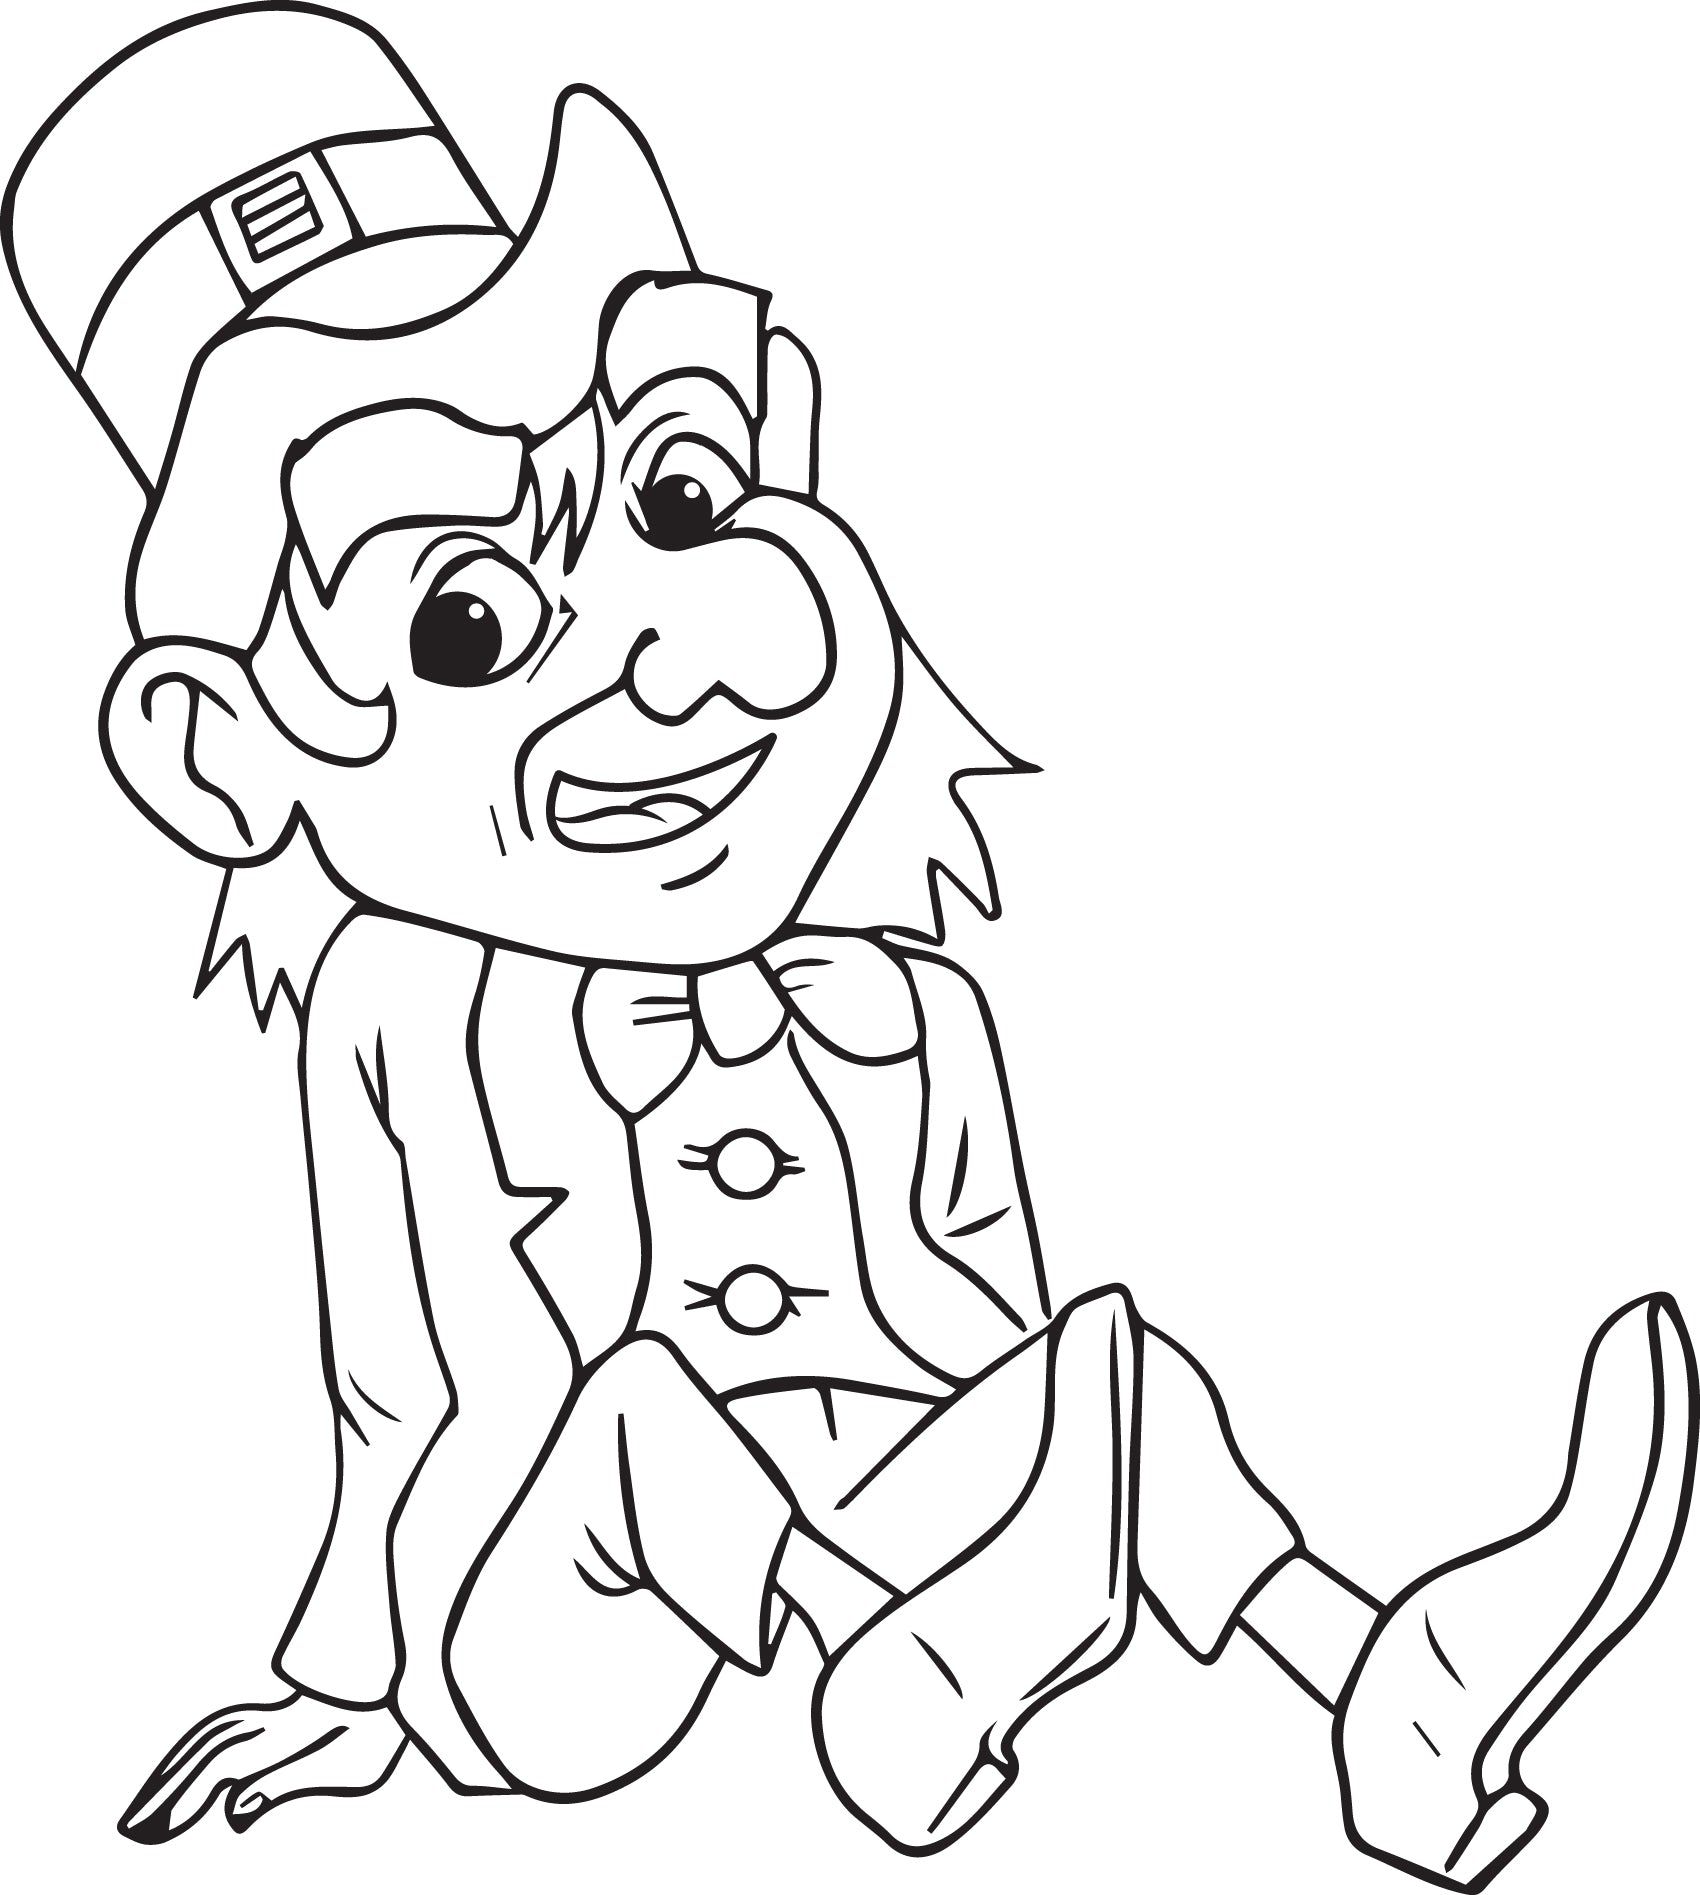 Leprechaun coloring page in coloring pages for kids coloring pages puppy coloring pages